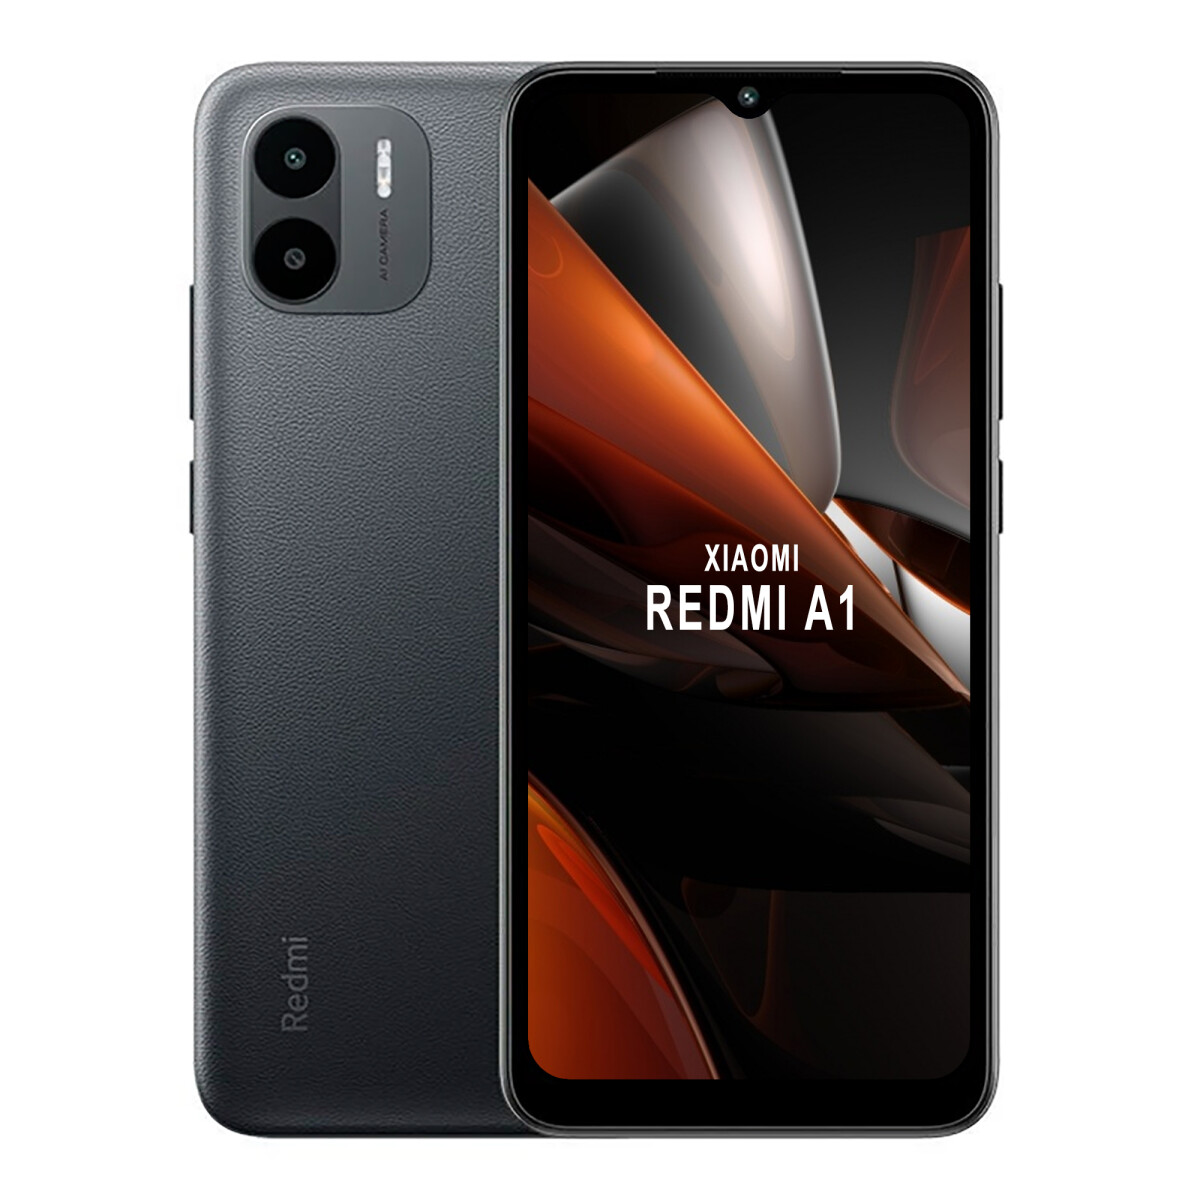 Xiaomi - Smartphone Redmi A1. 6.52" Ips Lcd 1600X720PX. Dualsim. 4G. Quad-core 2.0GHZ. Android 12, M - 001 